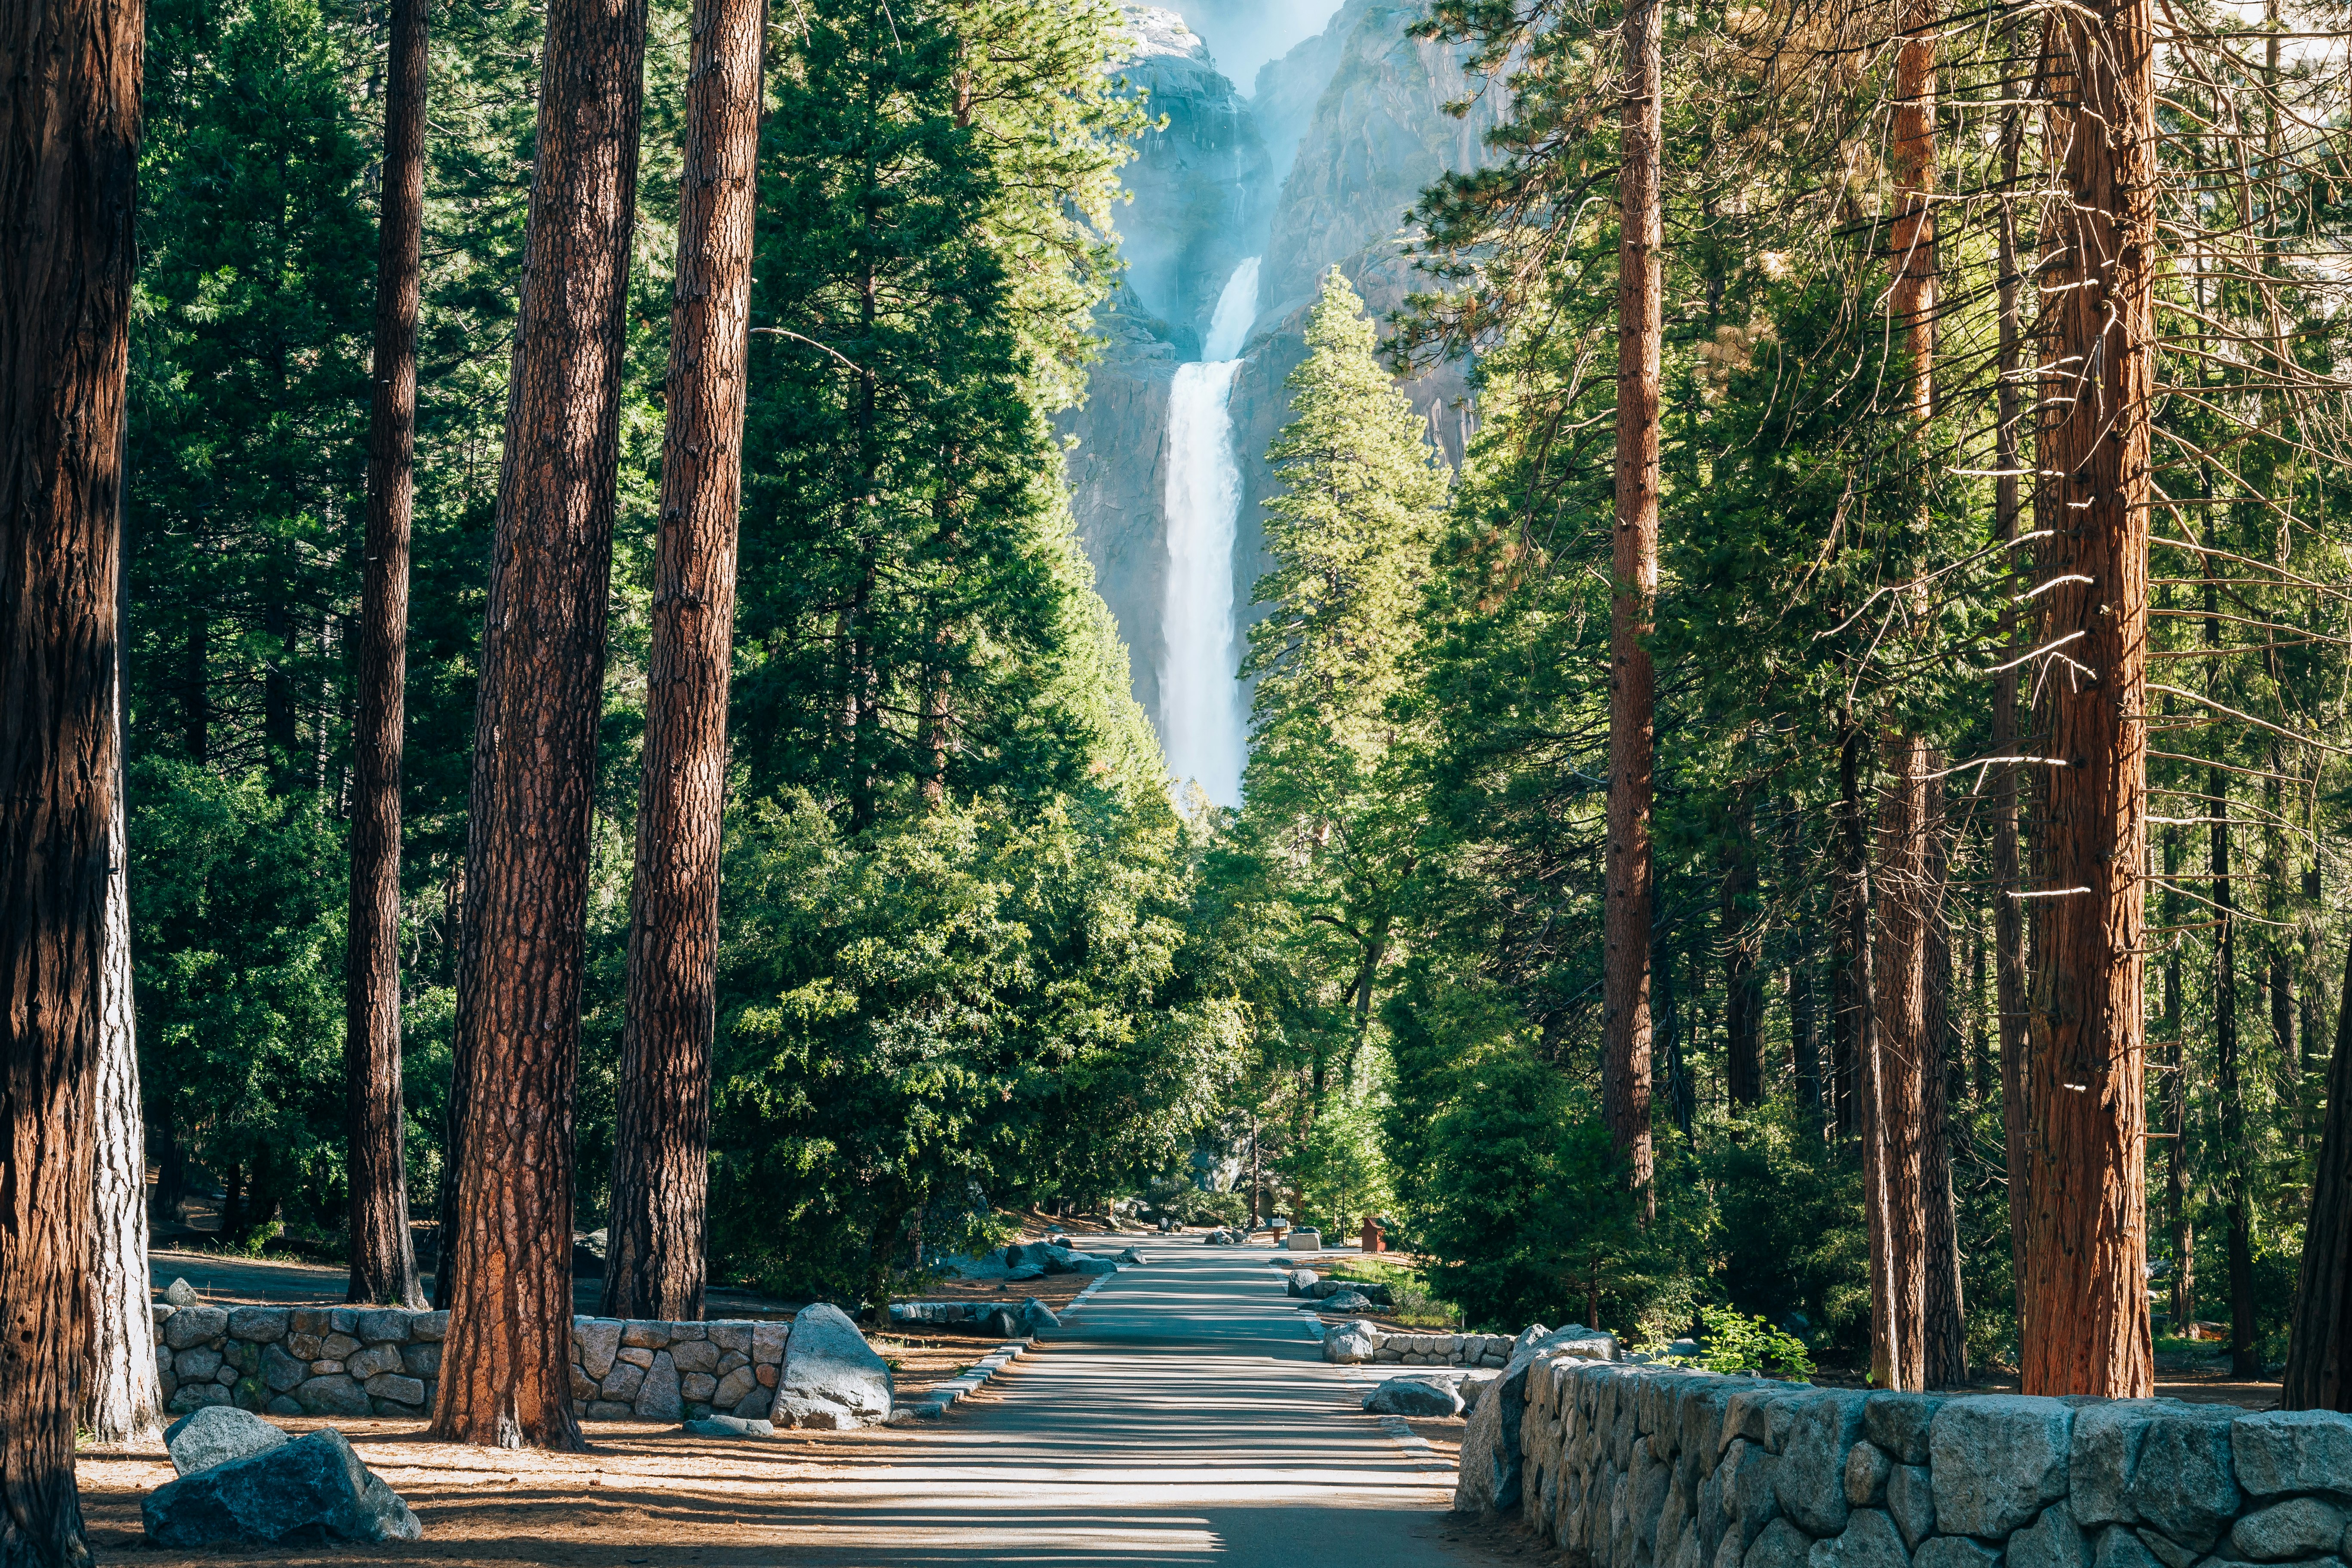 A pathway lined on both sides by towering pine trees, leading towards a waterfall.